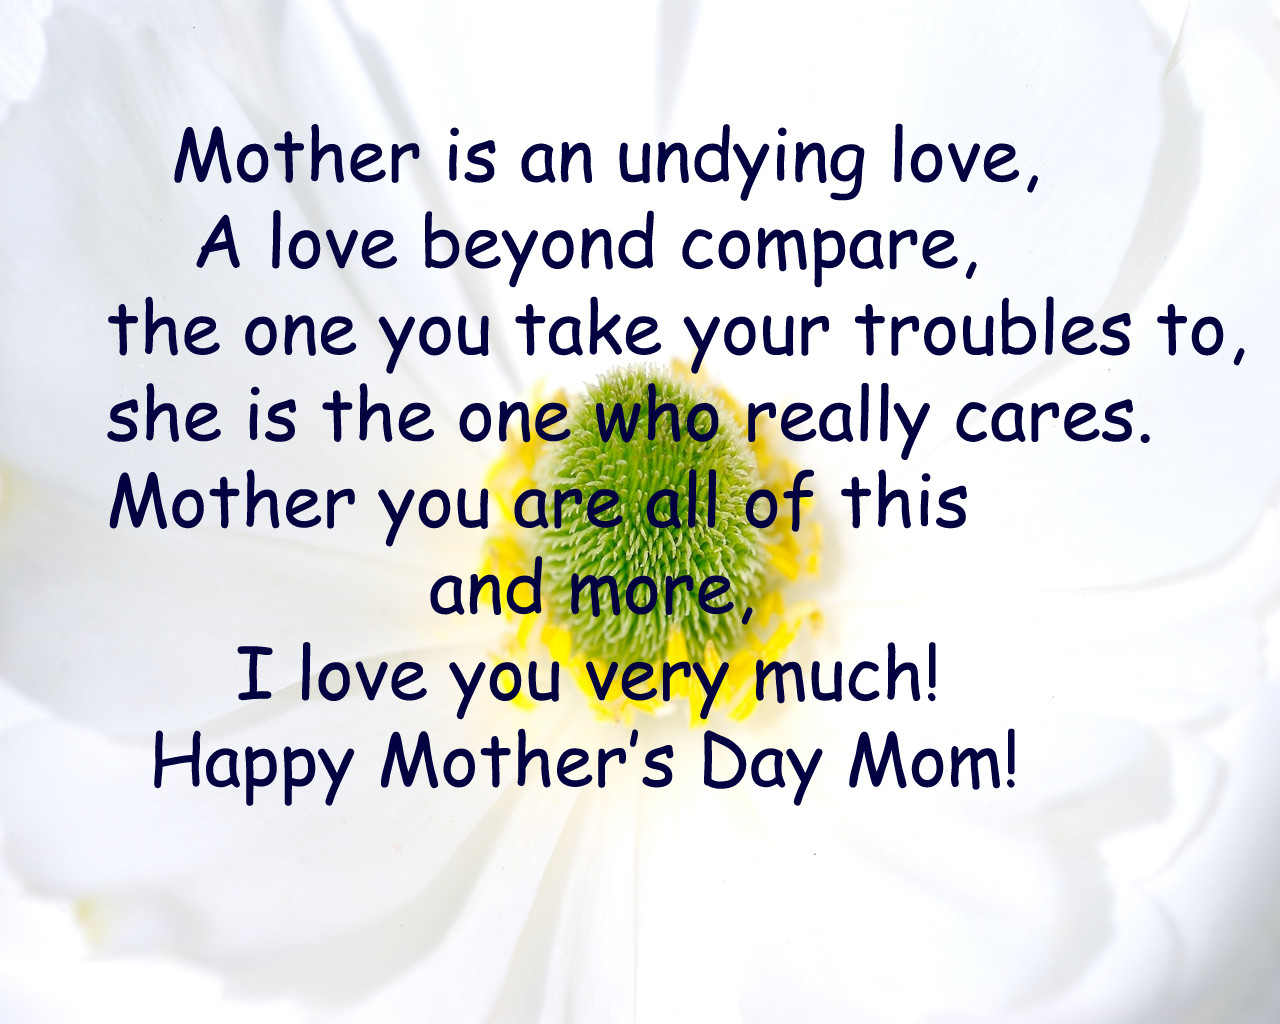 Mothers Day Quotes And Sayings
 Free Mothers Day Greetings Quotes Poems